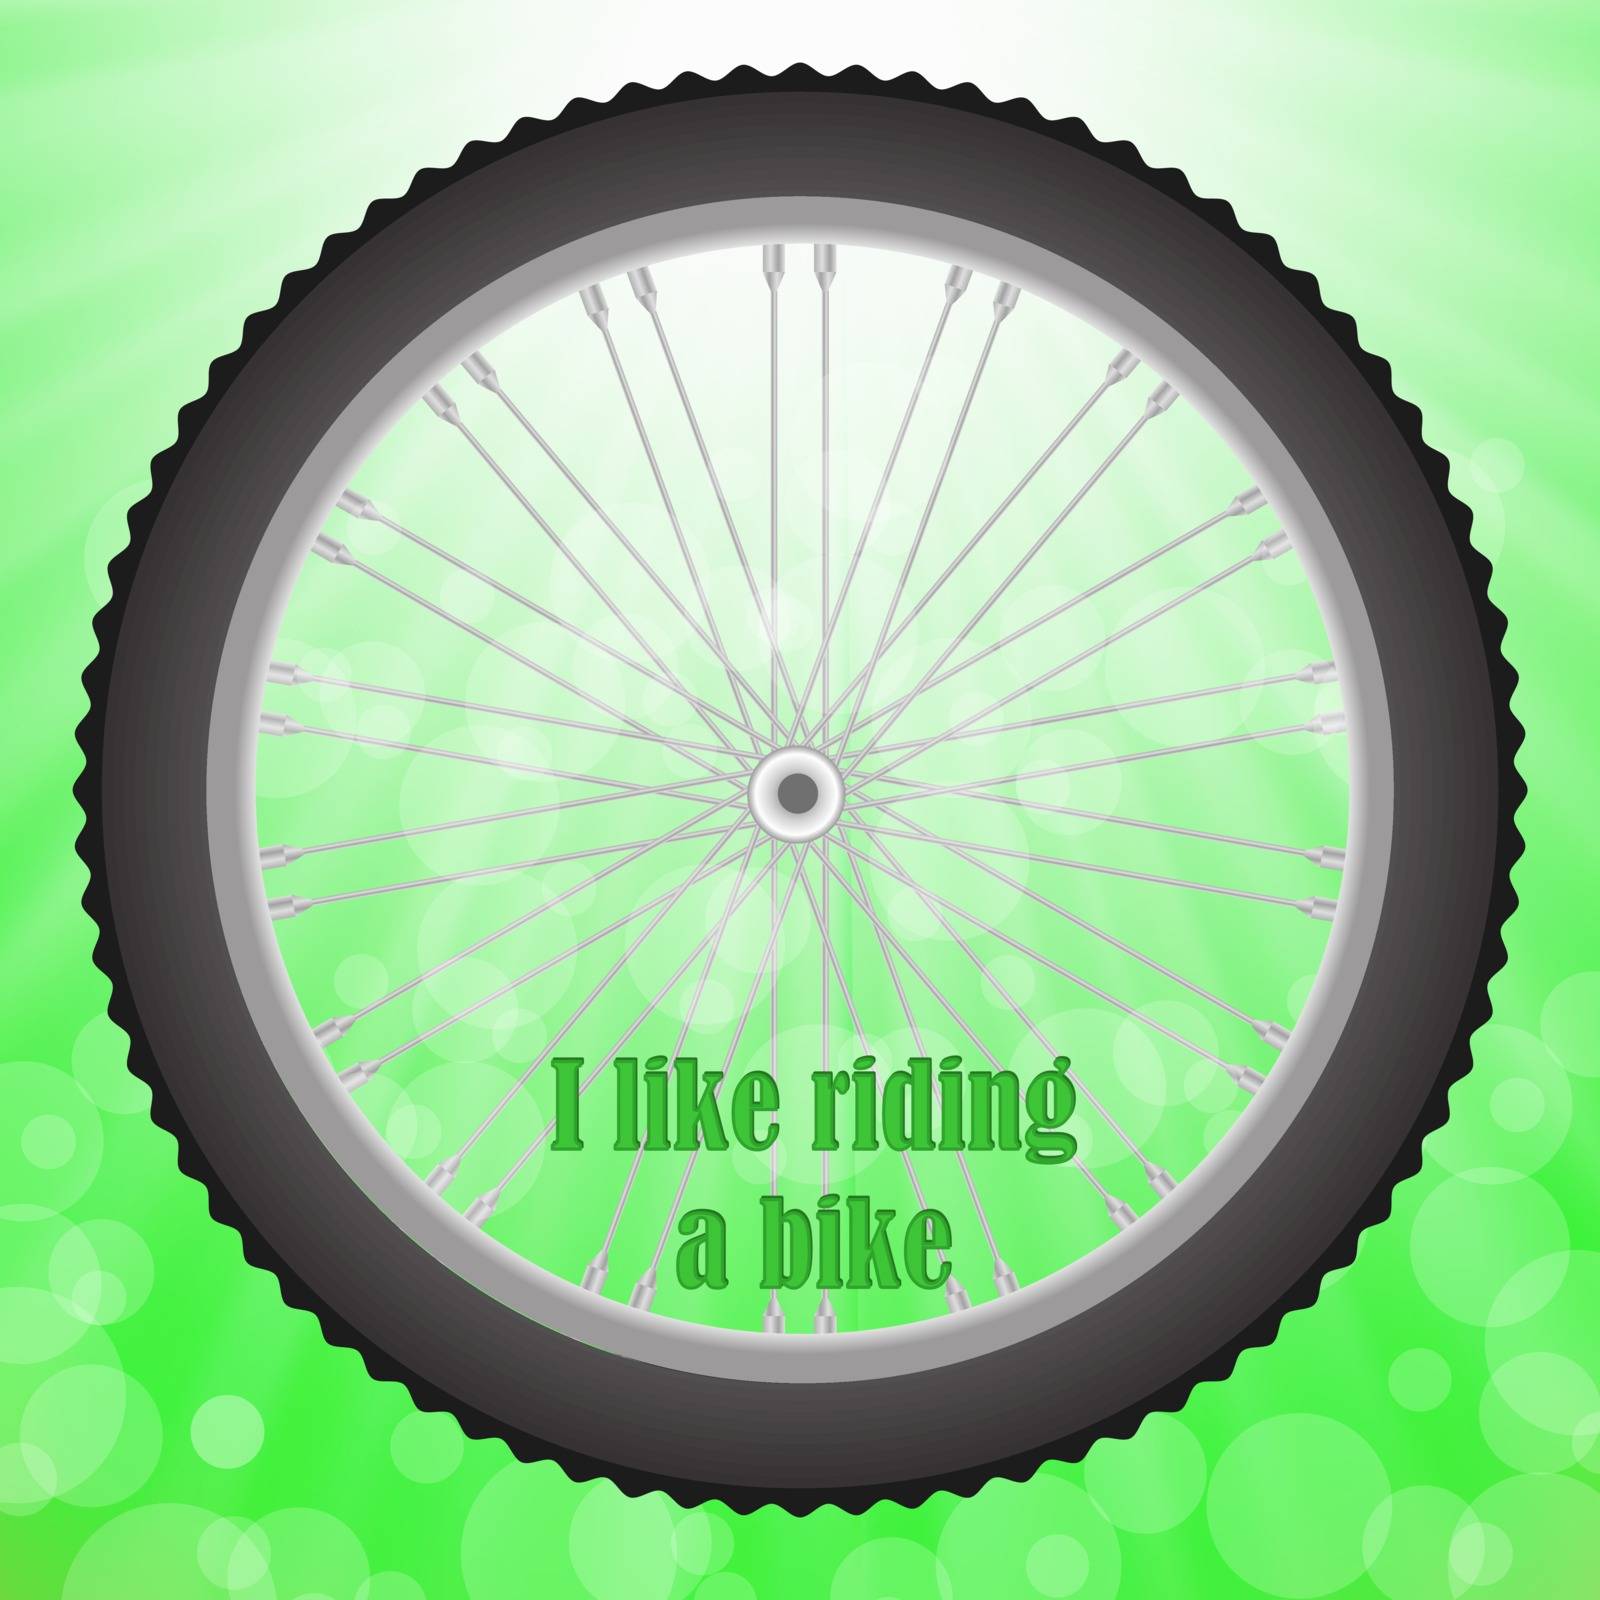 Bicycle Wheel Isolated on Summer Green Blurred Background